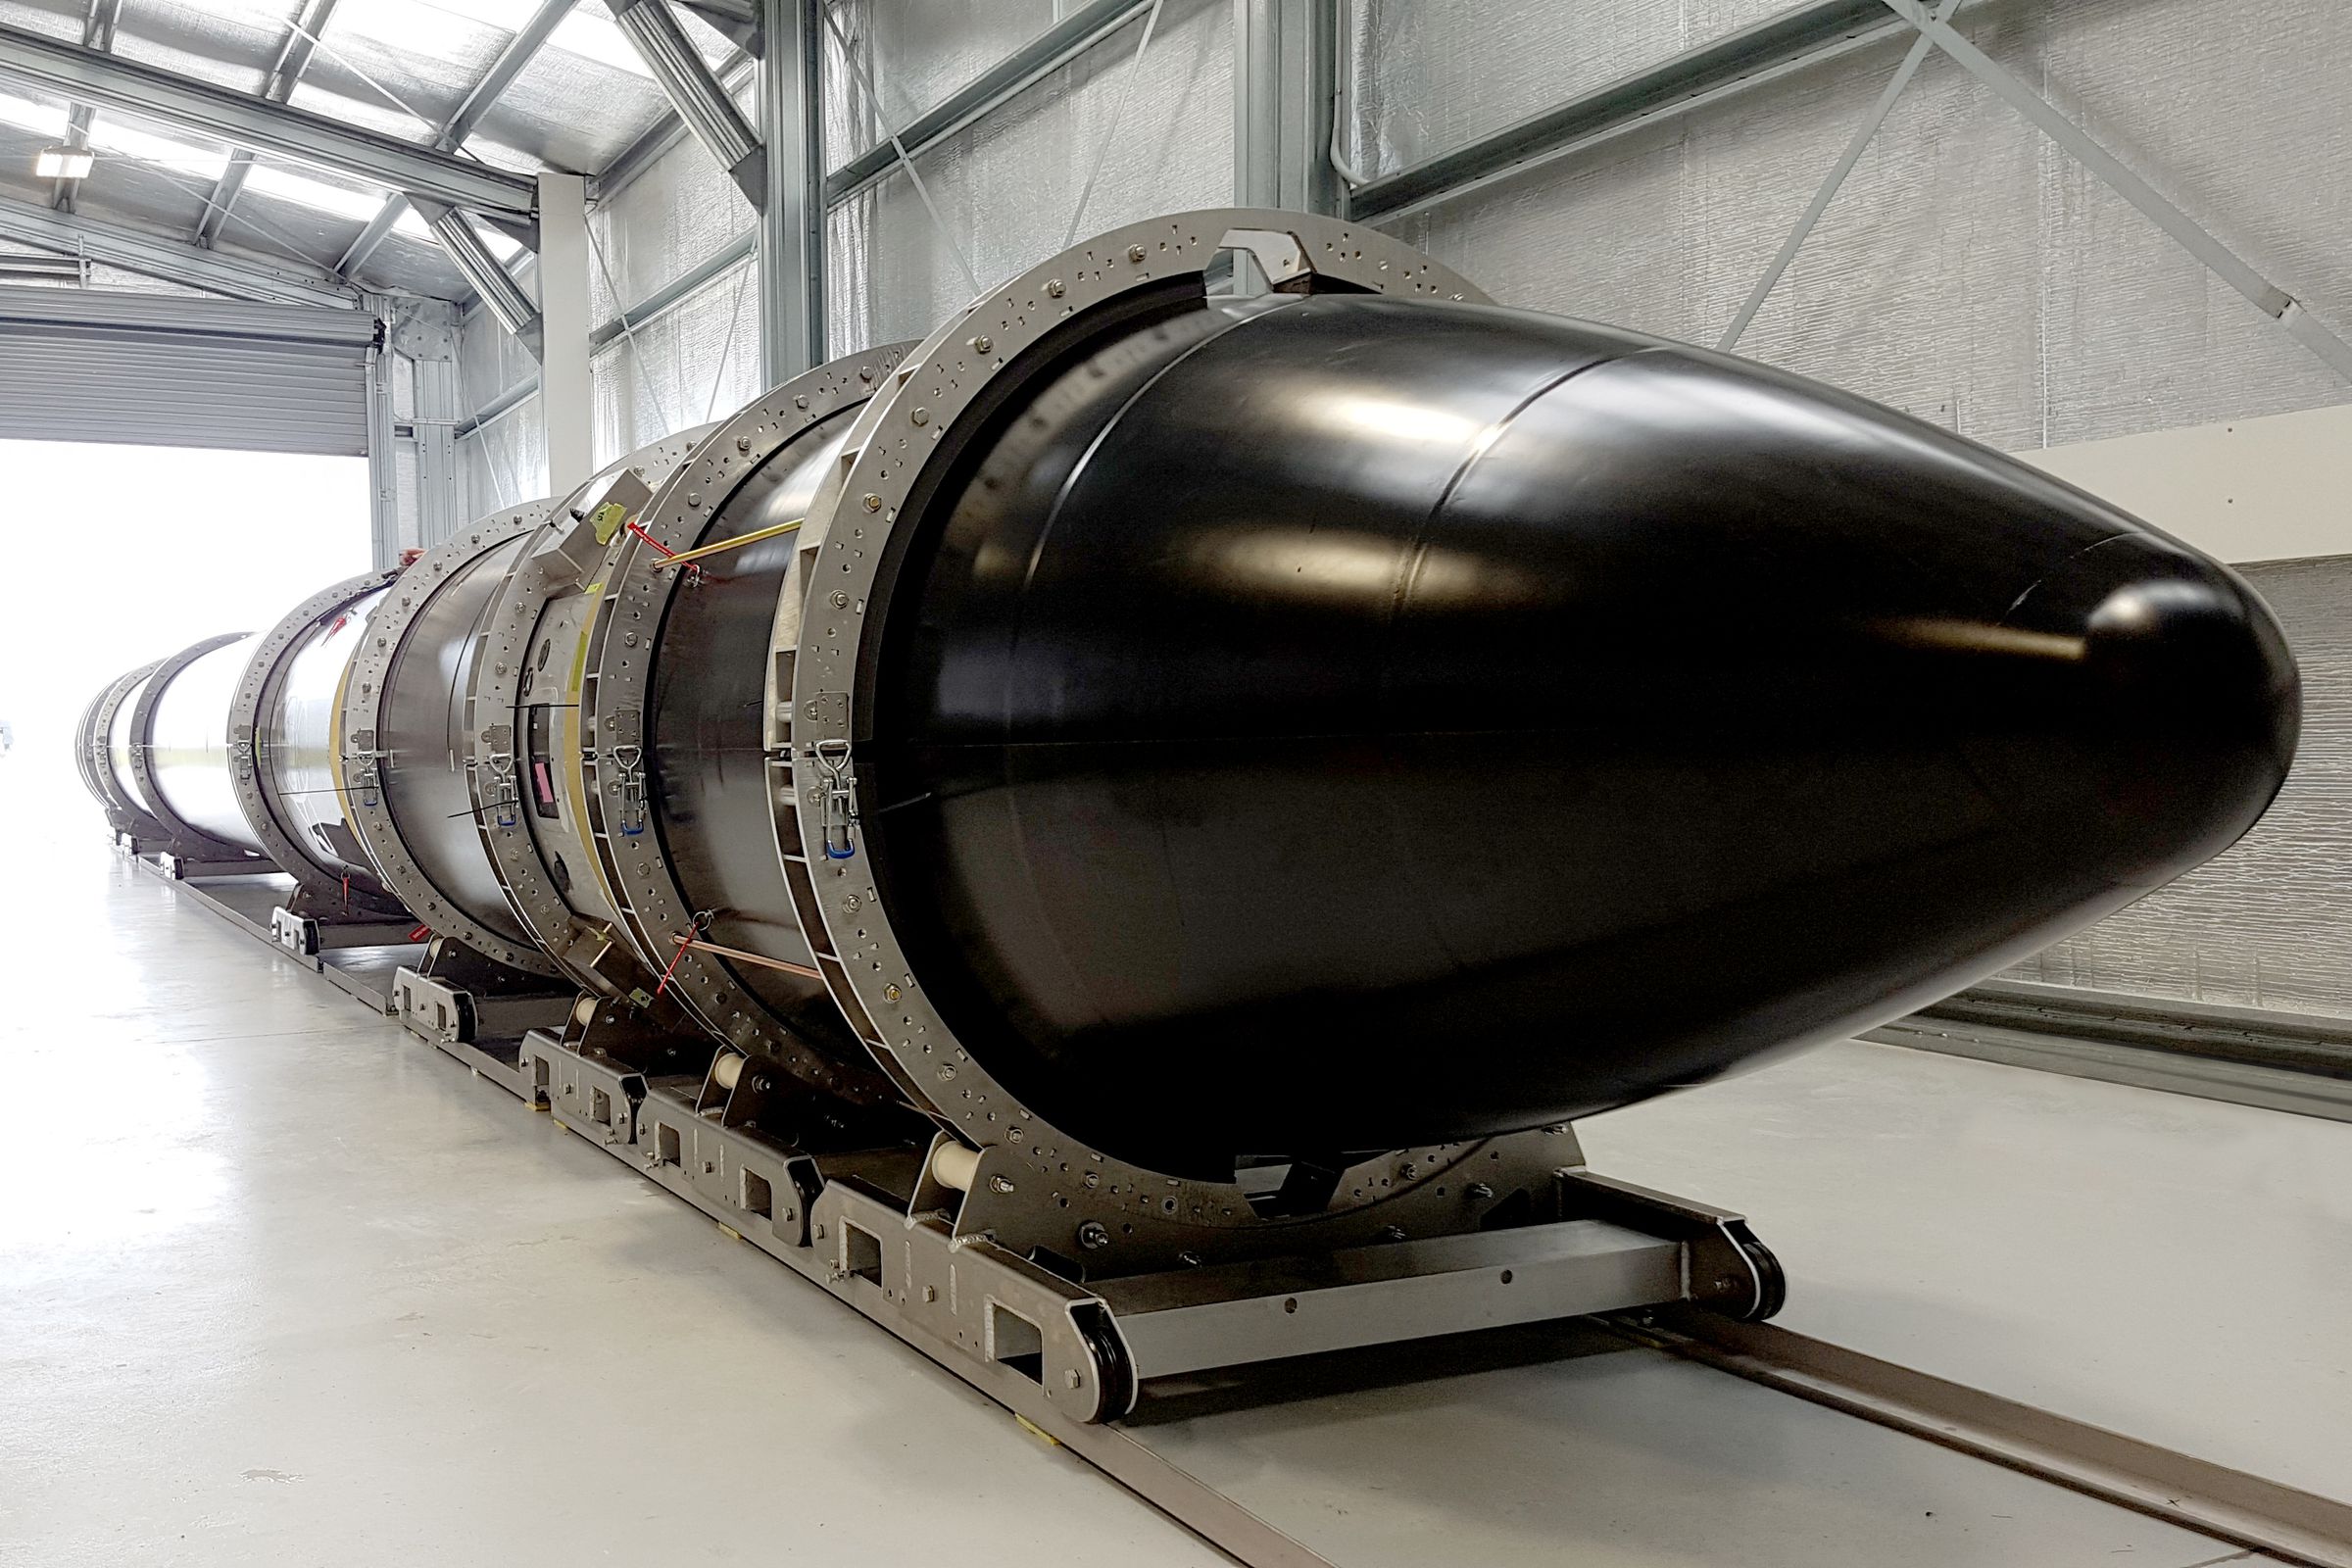 The first Electron test vehicle at Rocket Lab’s New Zealand launch site.